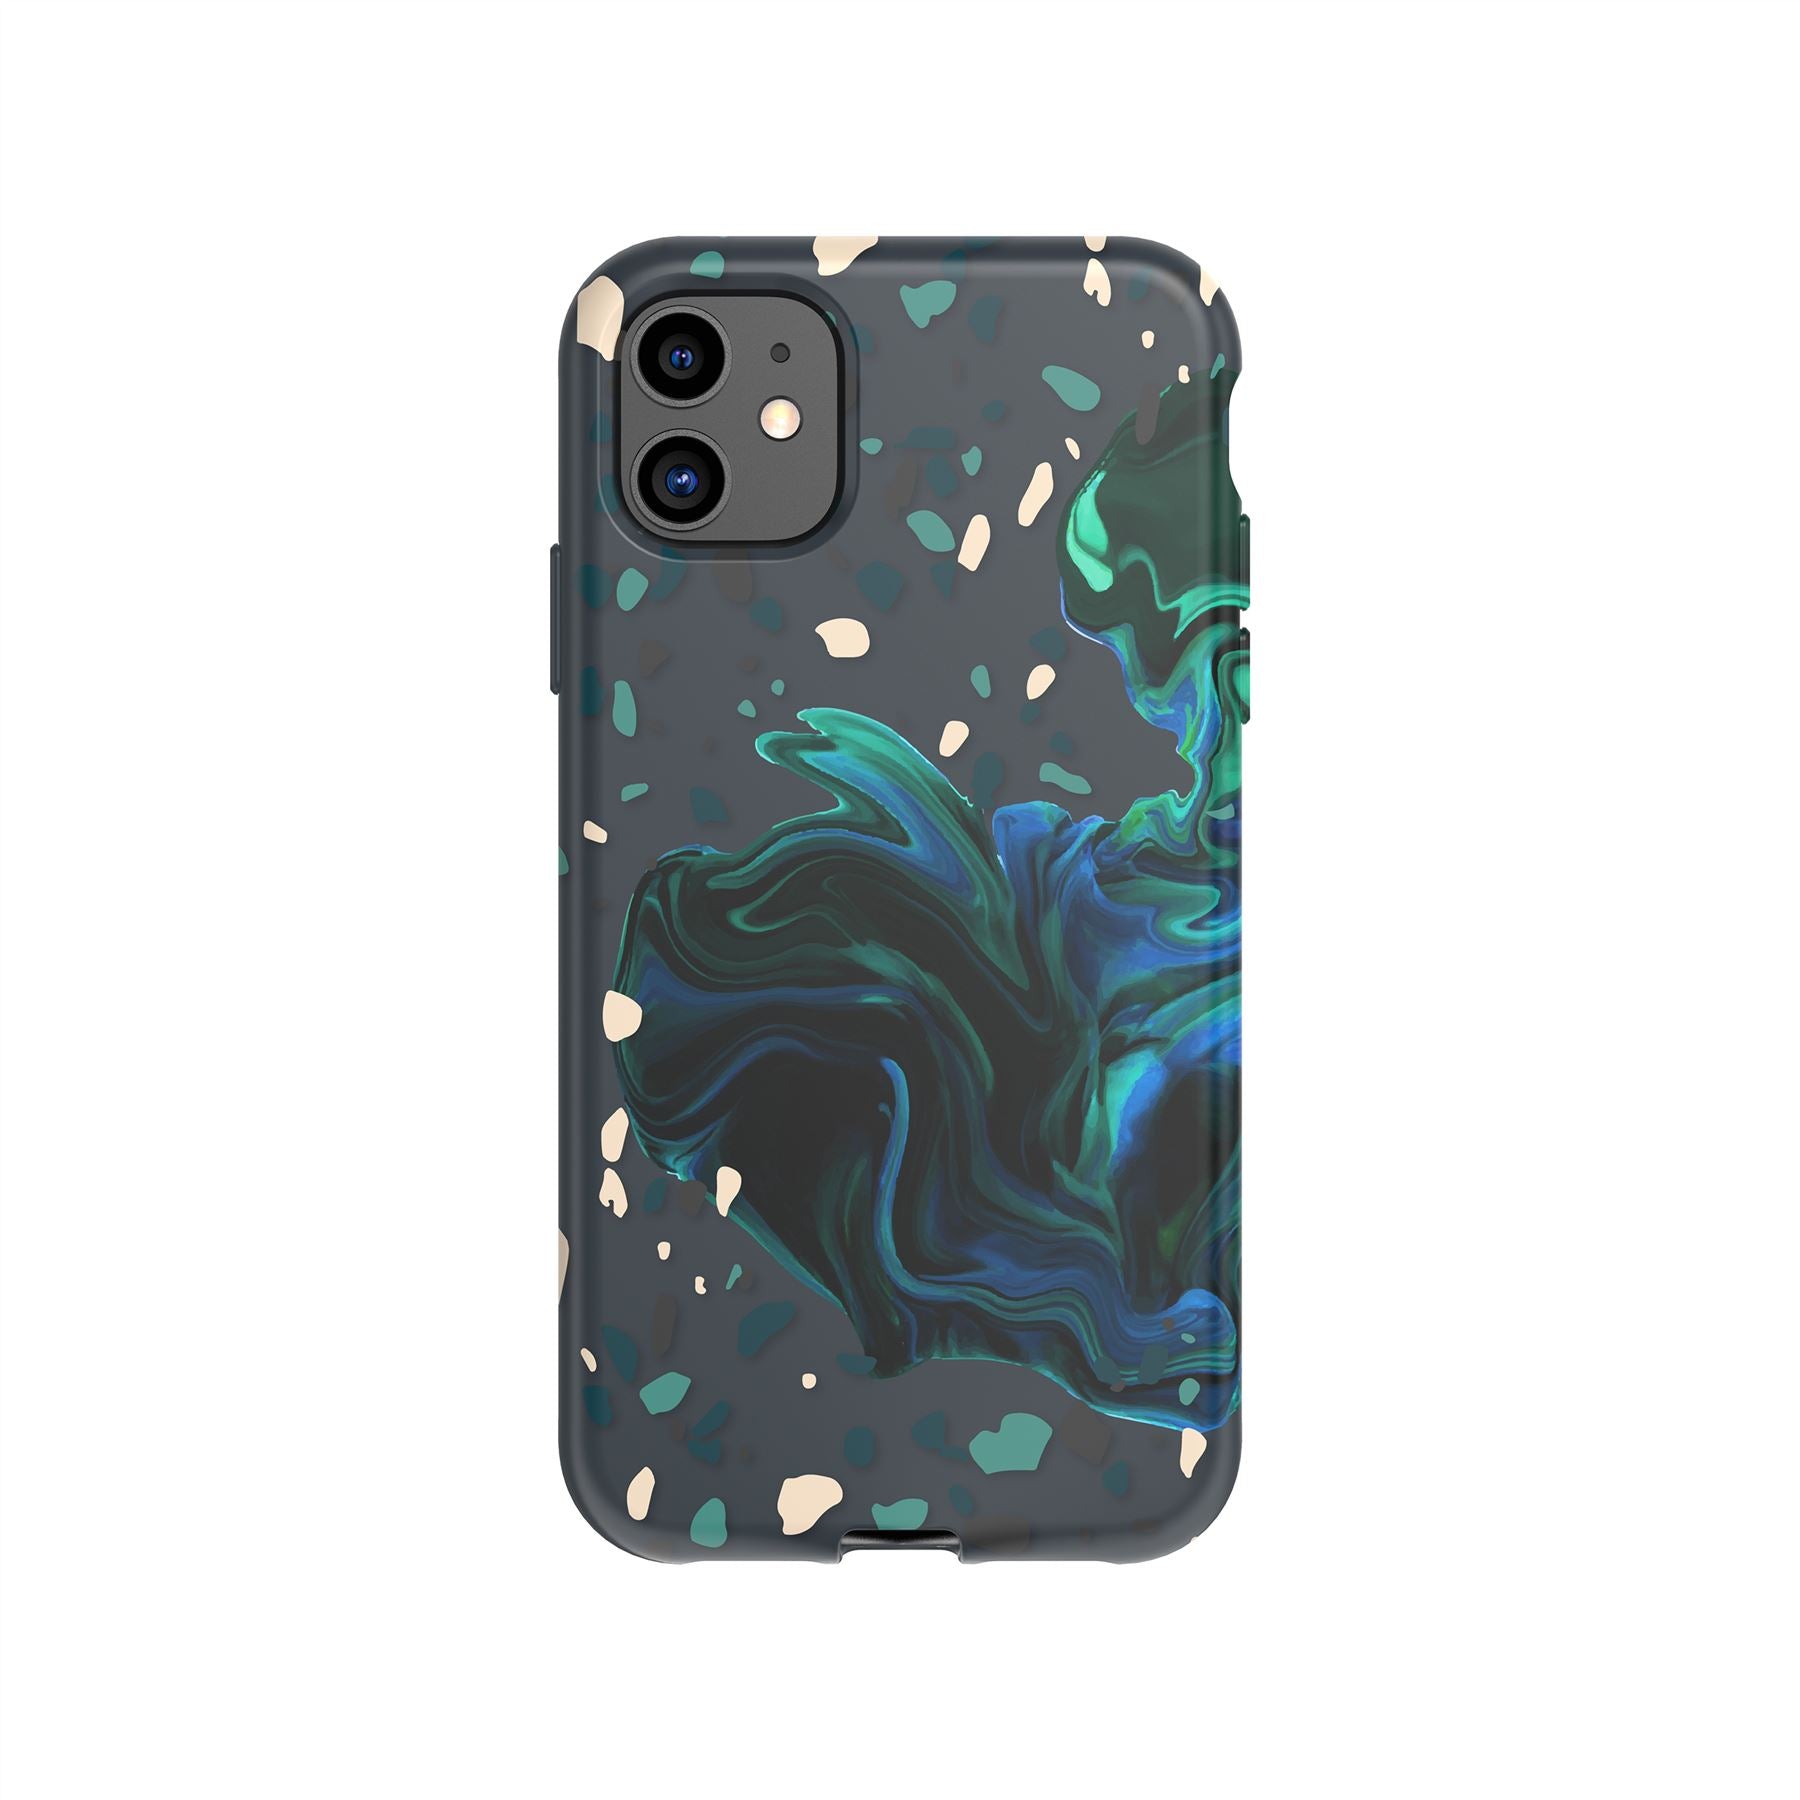 Remix in Motion - Apple iPhone 11 Case - Slate